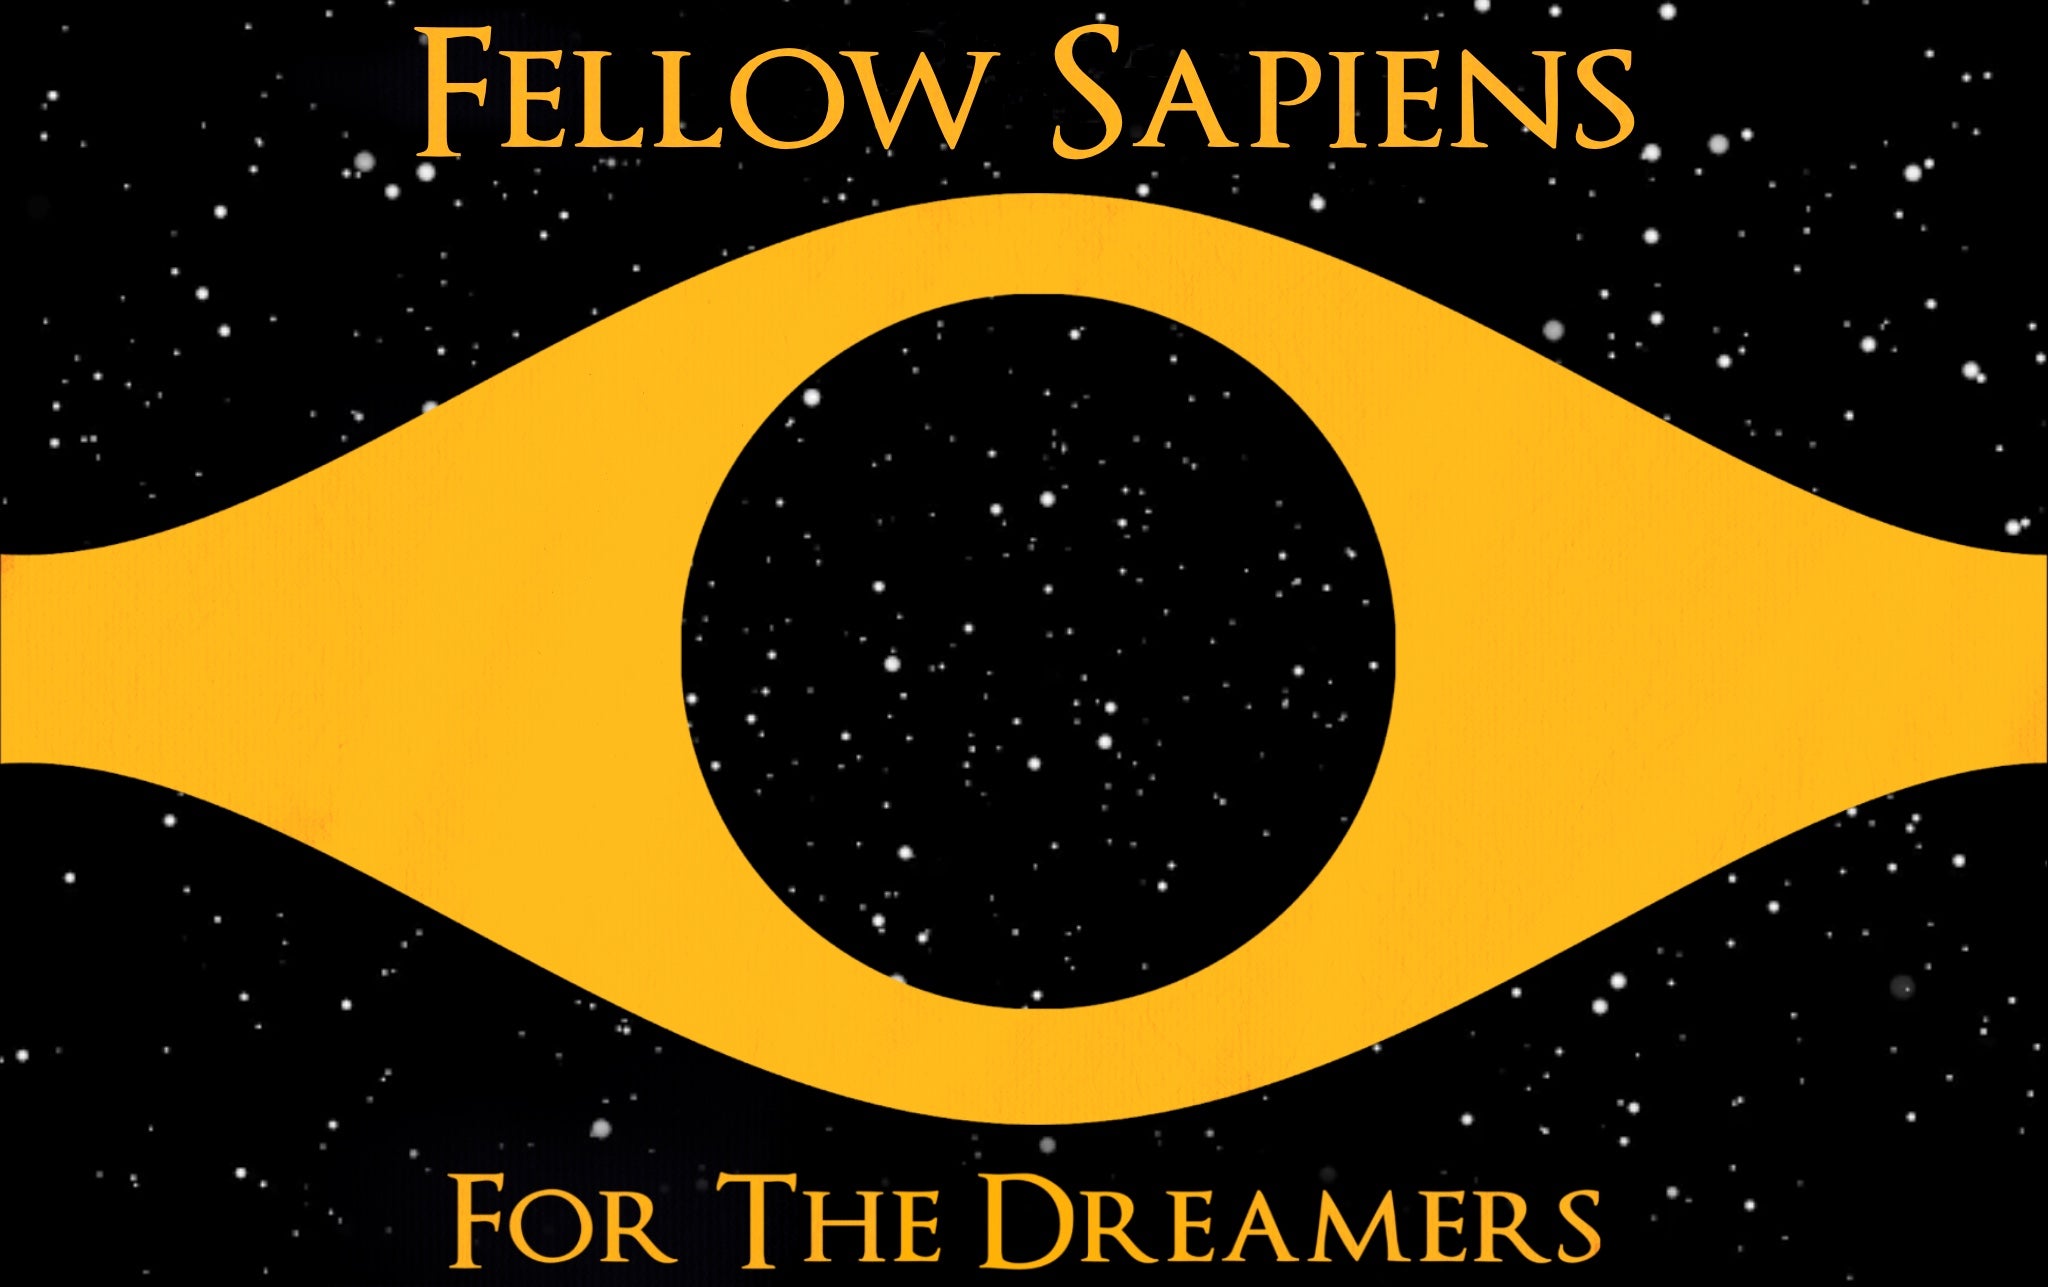 Fellow Sapiens - For The Dreamers